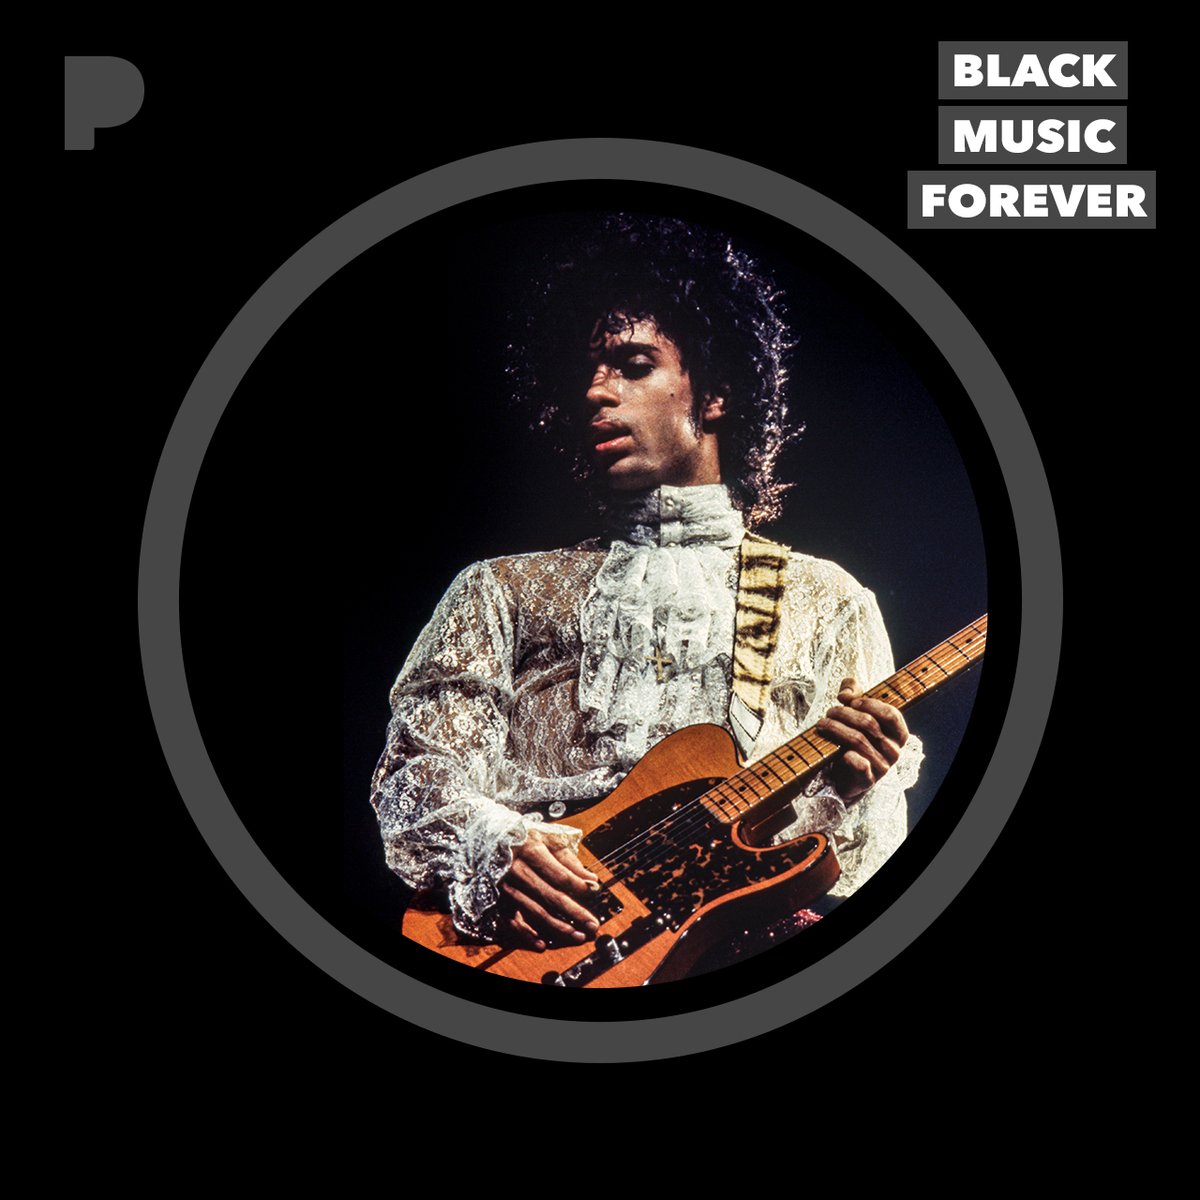 Prince shines brightly on the cover of @pandora's playlist Black Music Forever. Listen to hear “Little Red Corvette (Live In Syracuse)” from the newly remixed and enhanced release Prince and The Revolution: Live. Prince.lnk.to/PandoraBMR